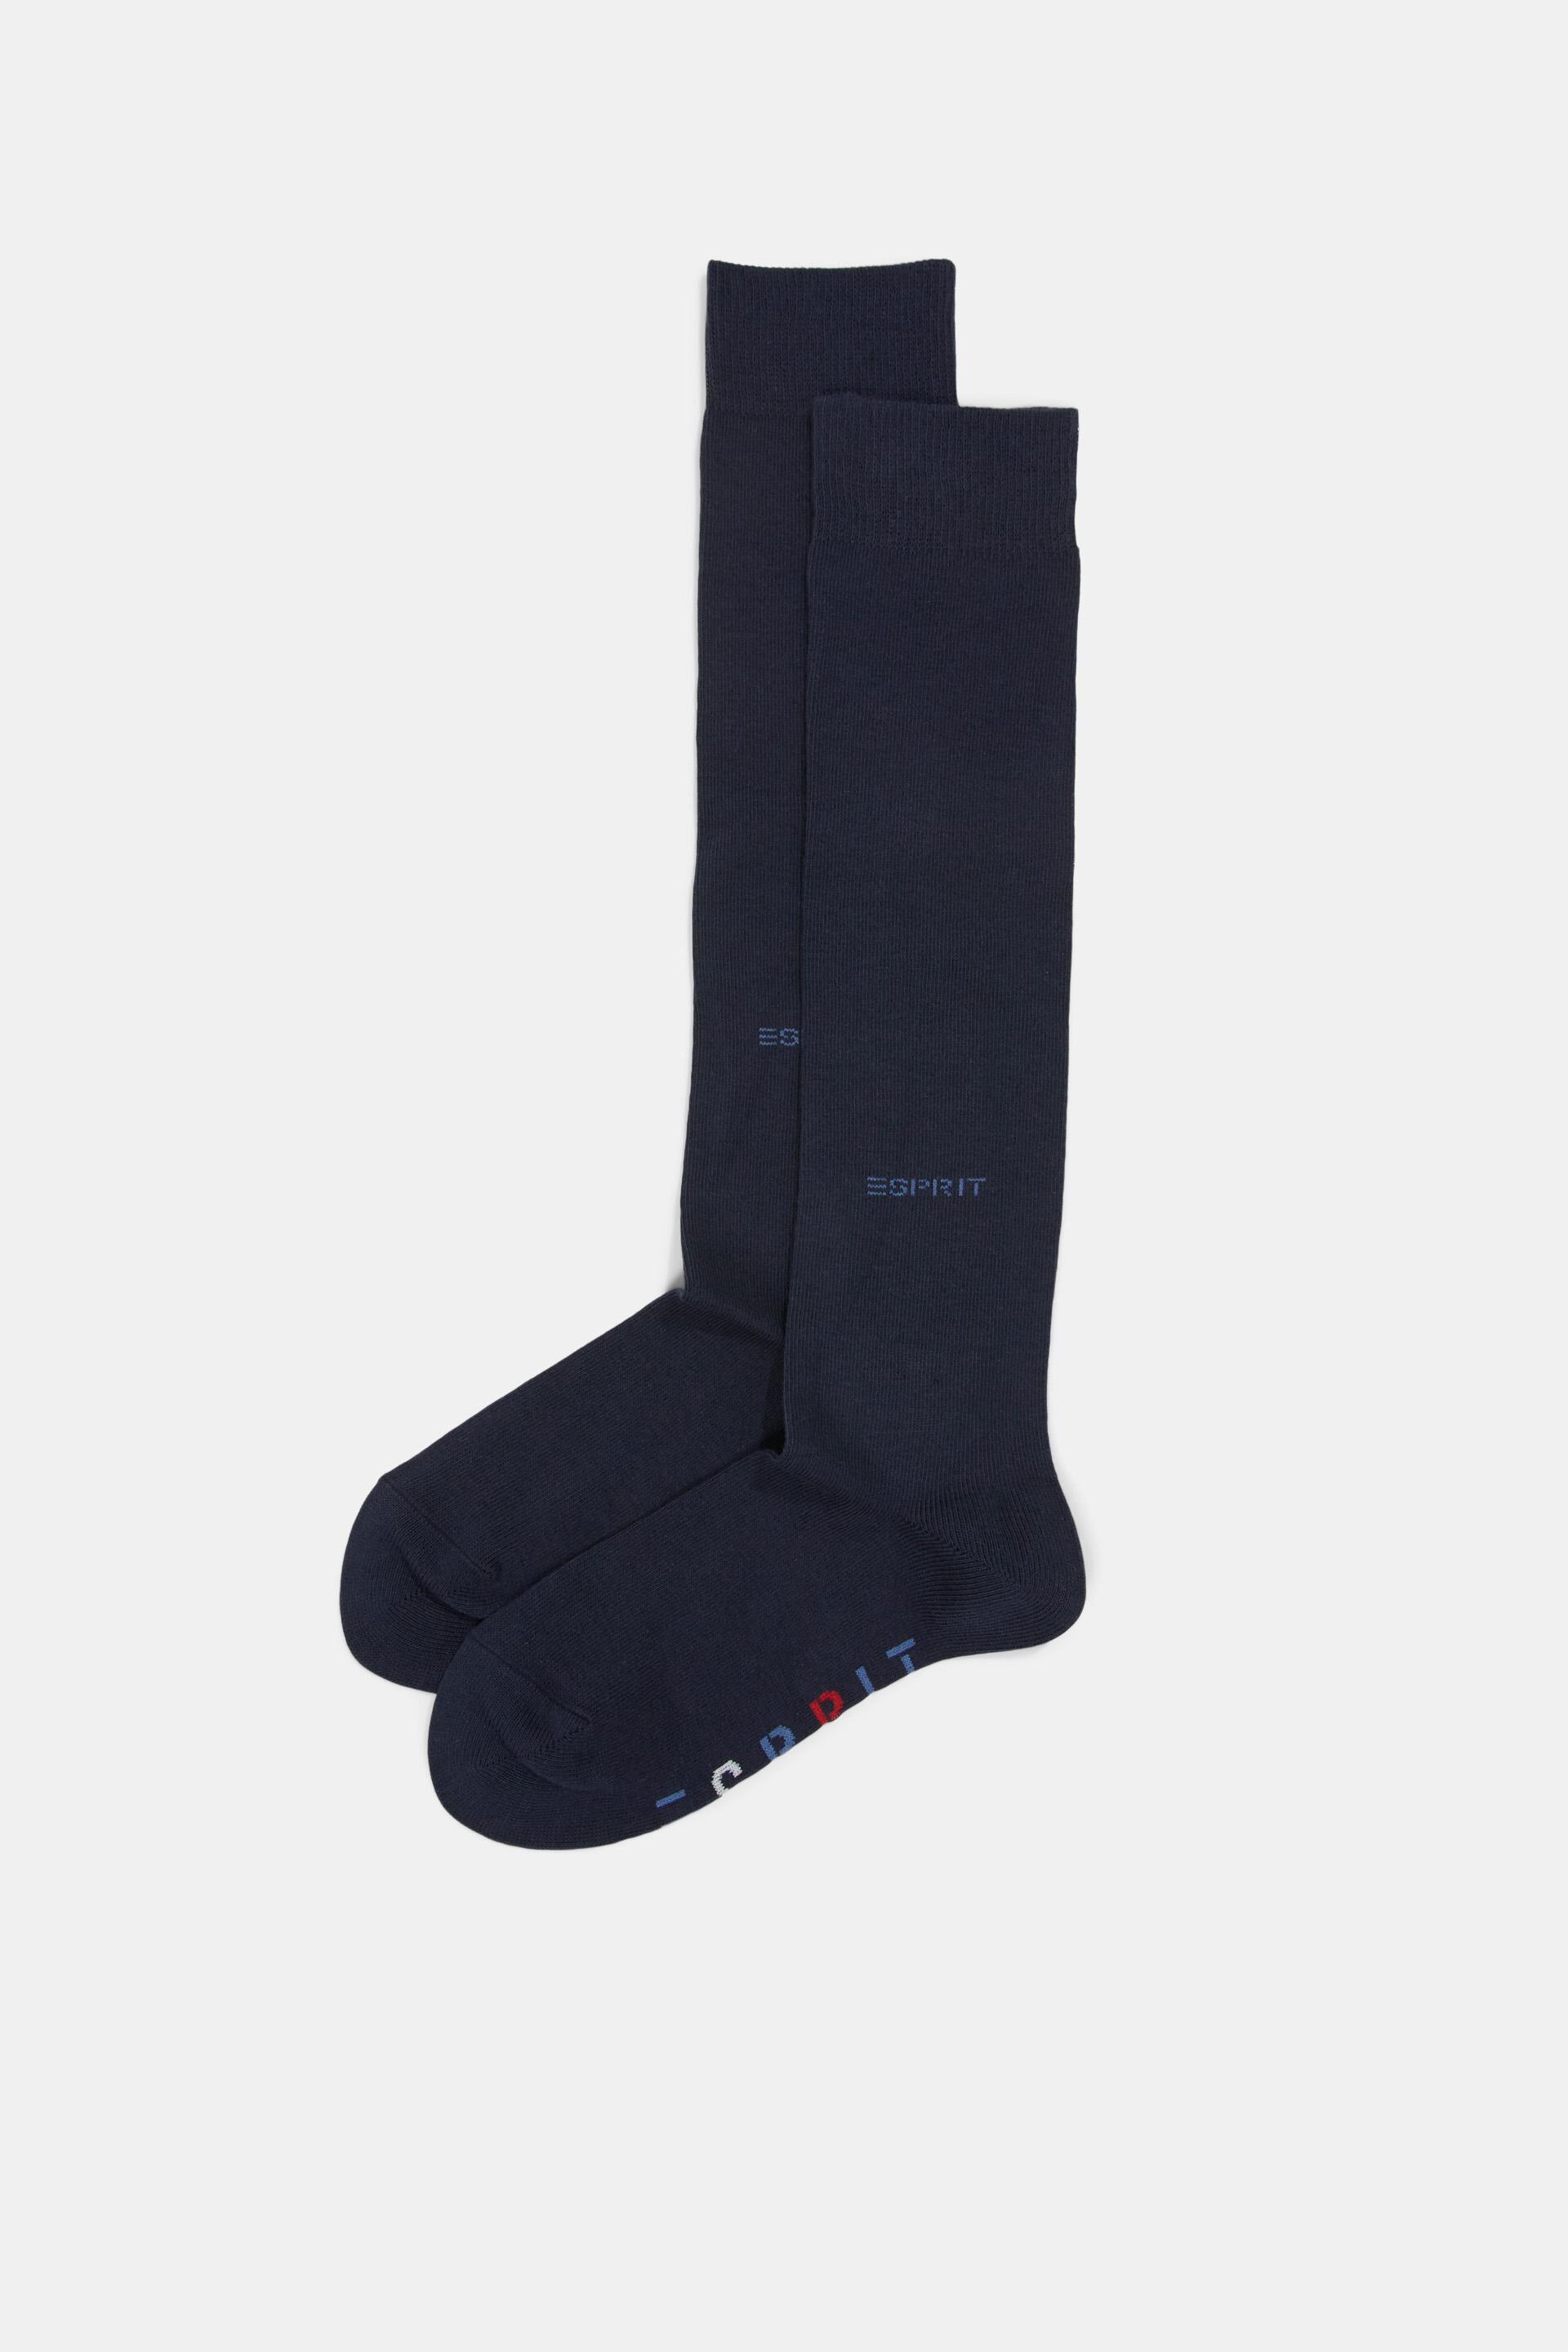 Esprit pack with a socks knee-high of Double logo